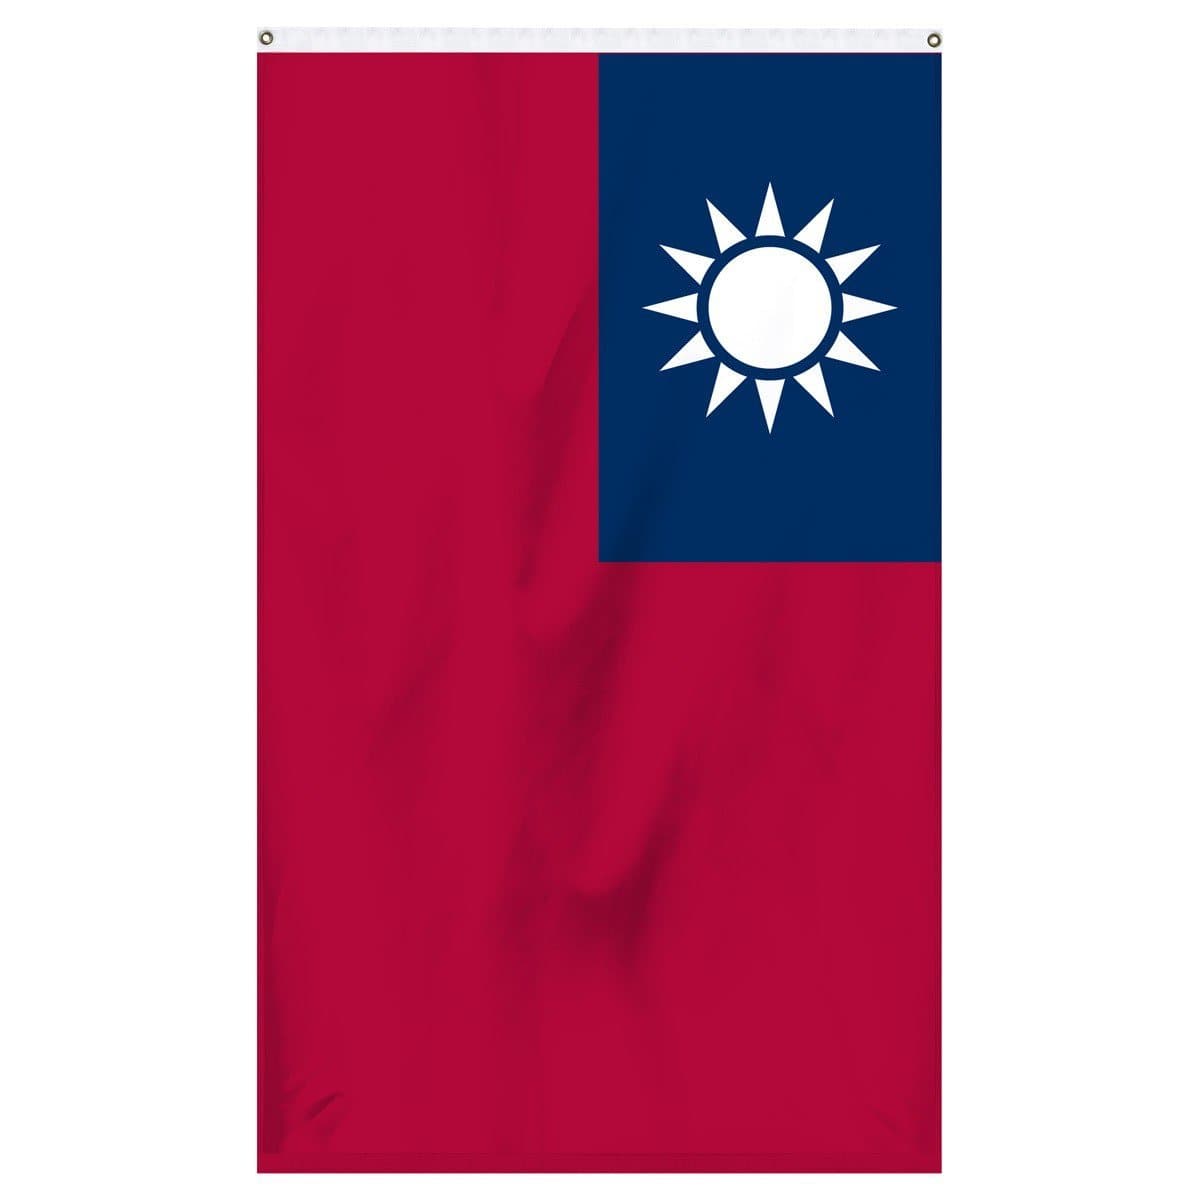 Taiwan National Flag for sale to buy online from Atlantic Flag and Pole.Red flag with a blue field in the corner with a white sun.